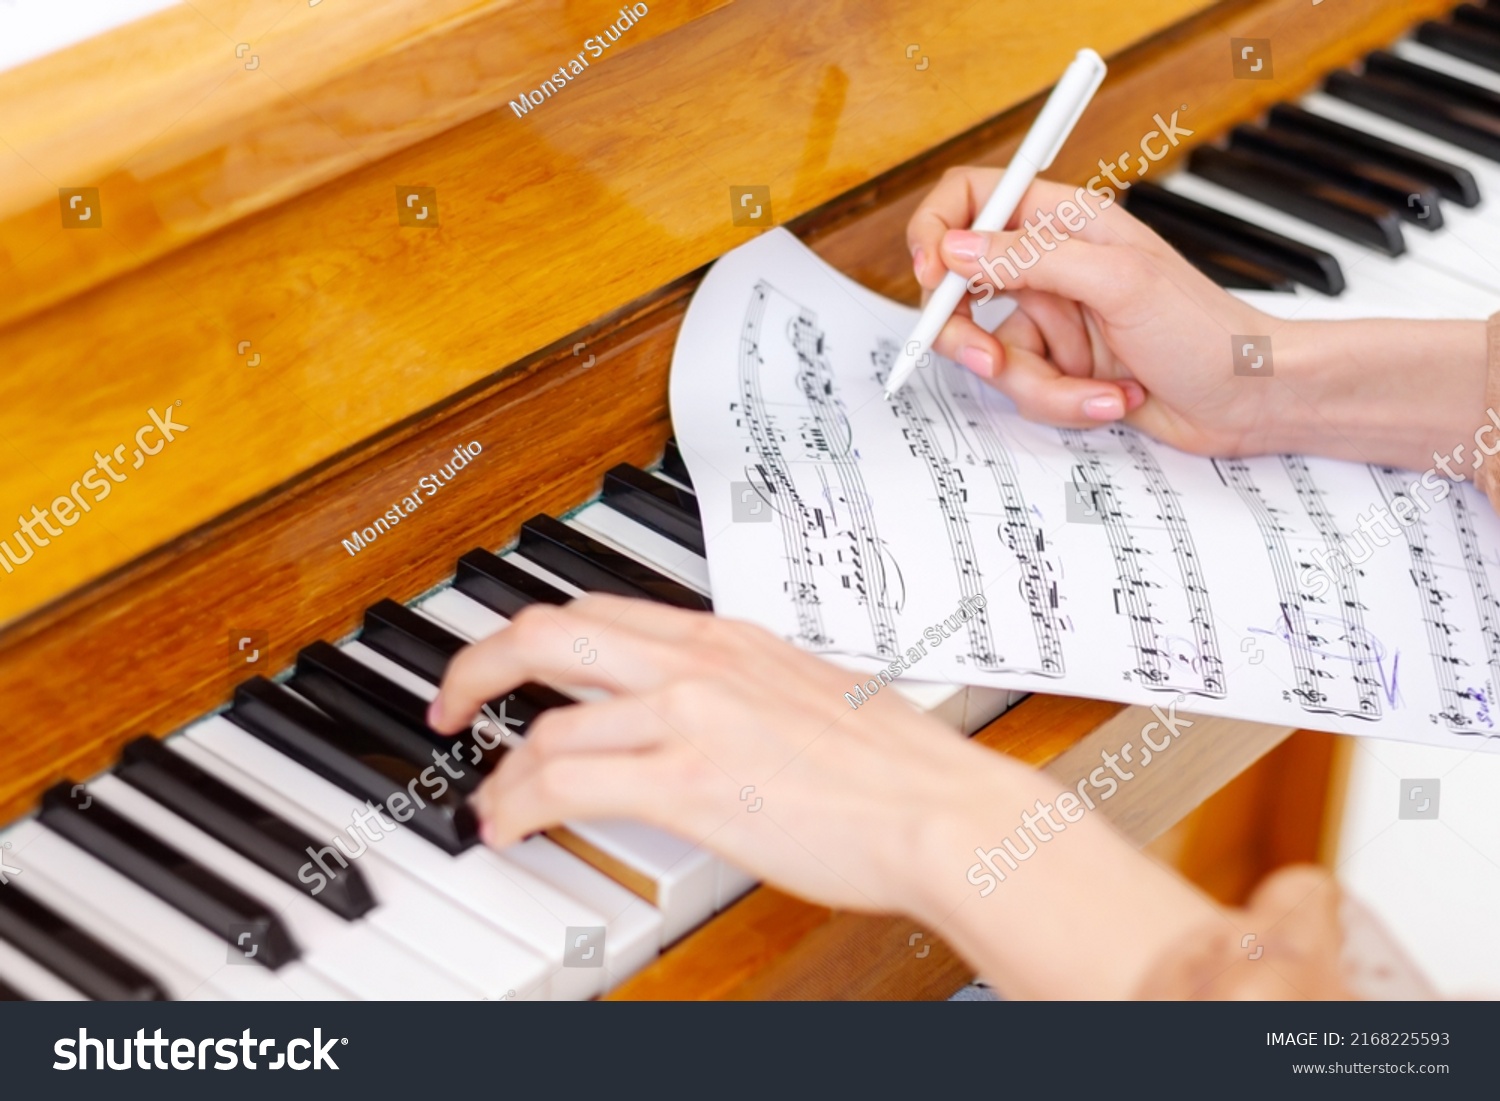 Woman's hands playing piano at home. The woman is professional pianist arranging music using piano keyboards. Musician practicing keyboard composing music. Artist create instrumental acoustic melody. #2168225593